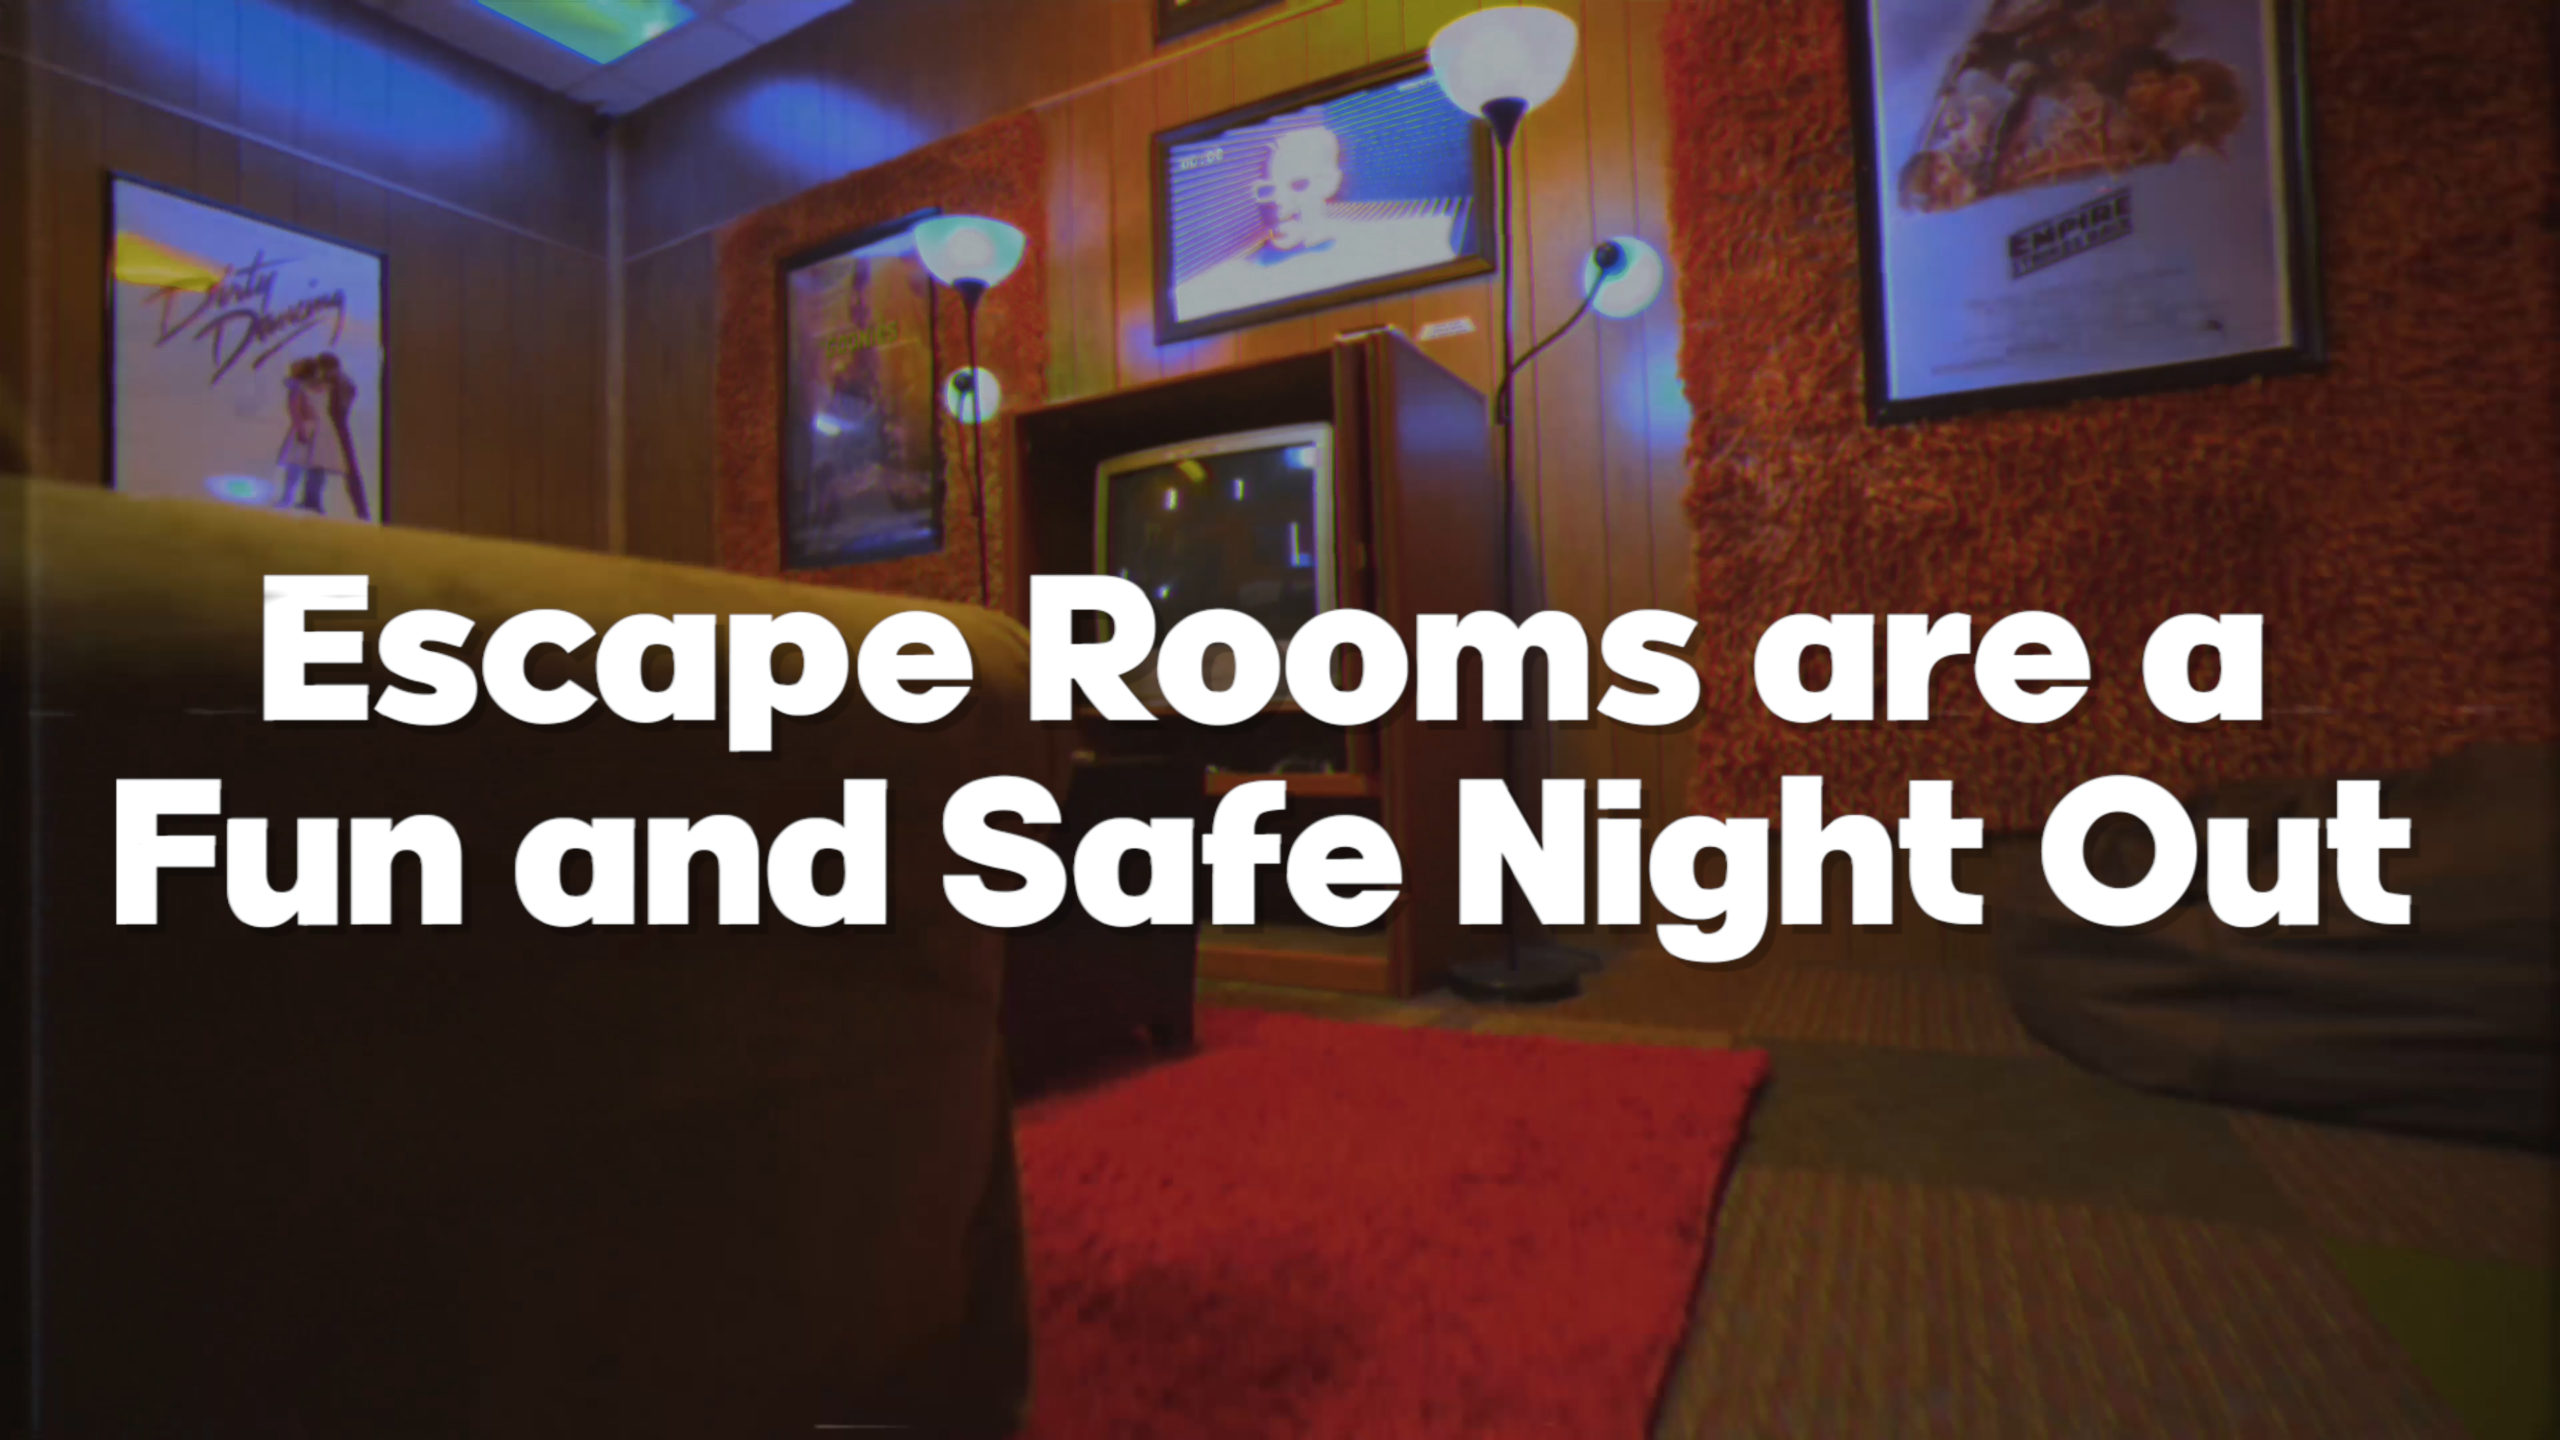 Escape Rooms are a Fun and Safe Night Out - Escape Rooms are a Fun and Safe Night Out